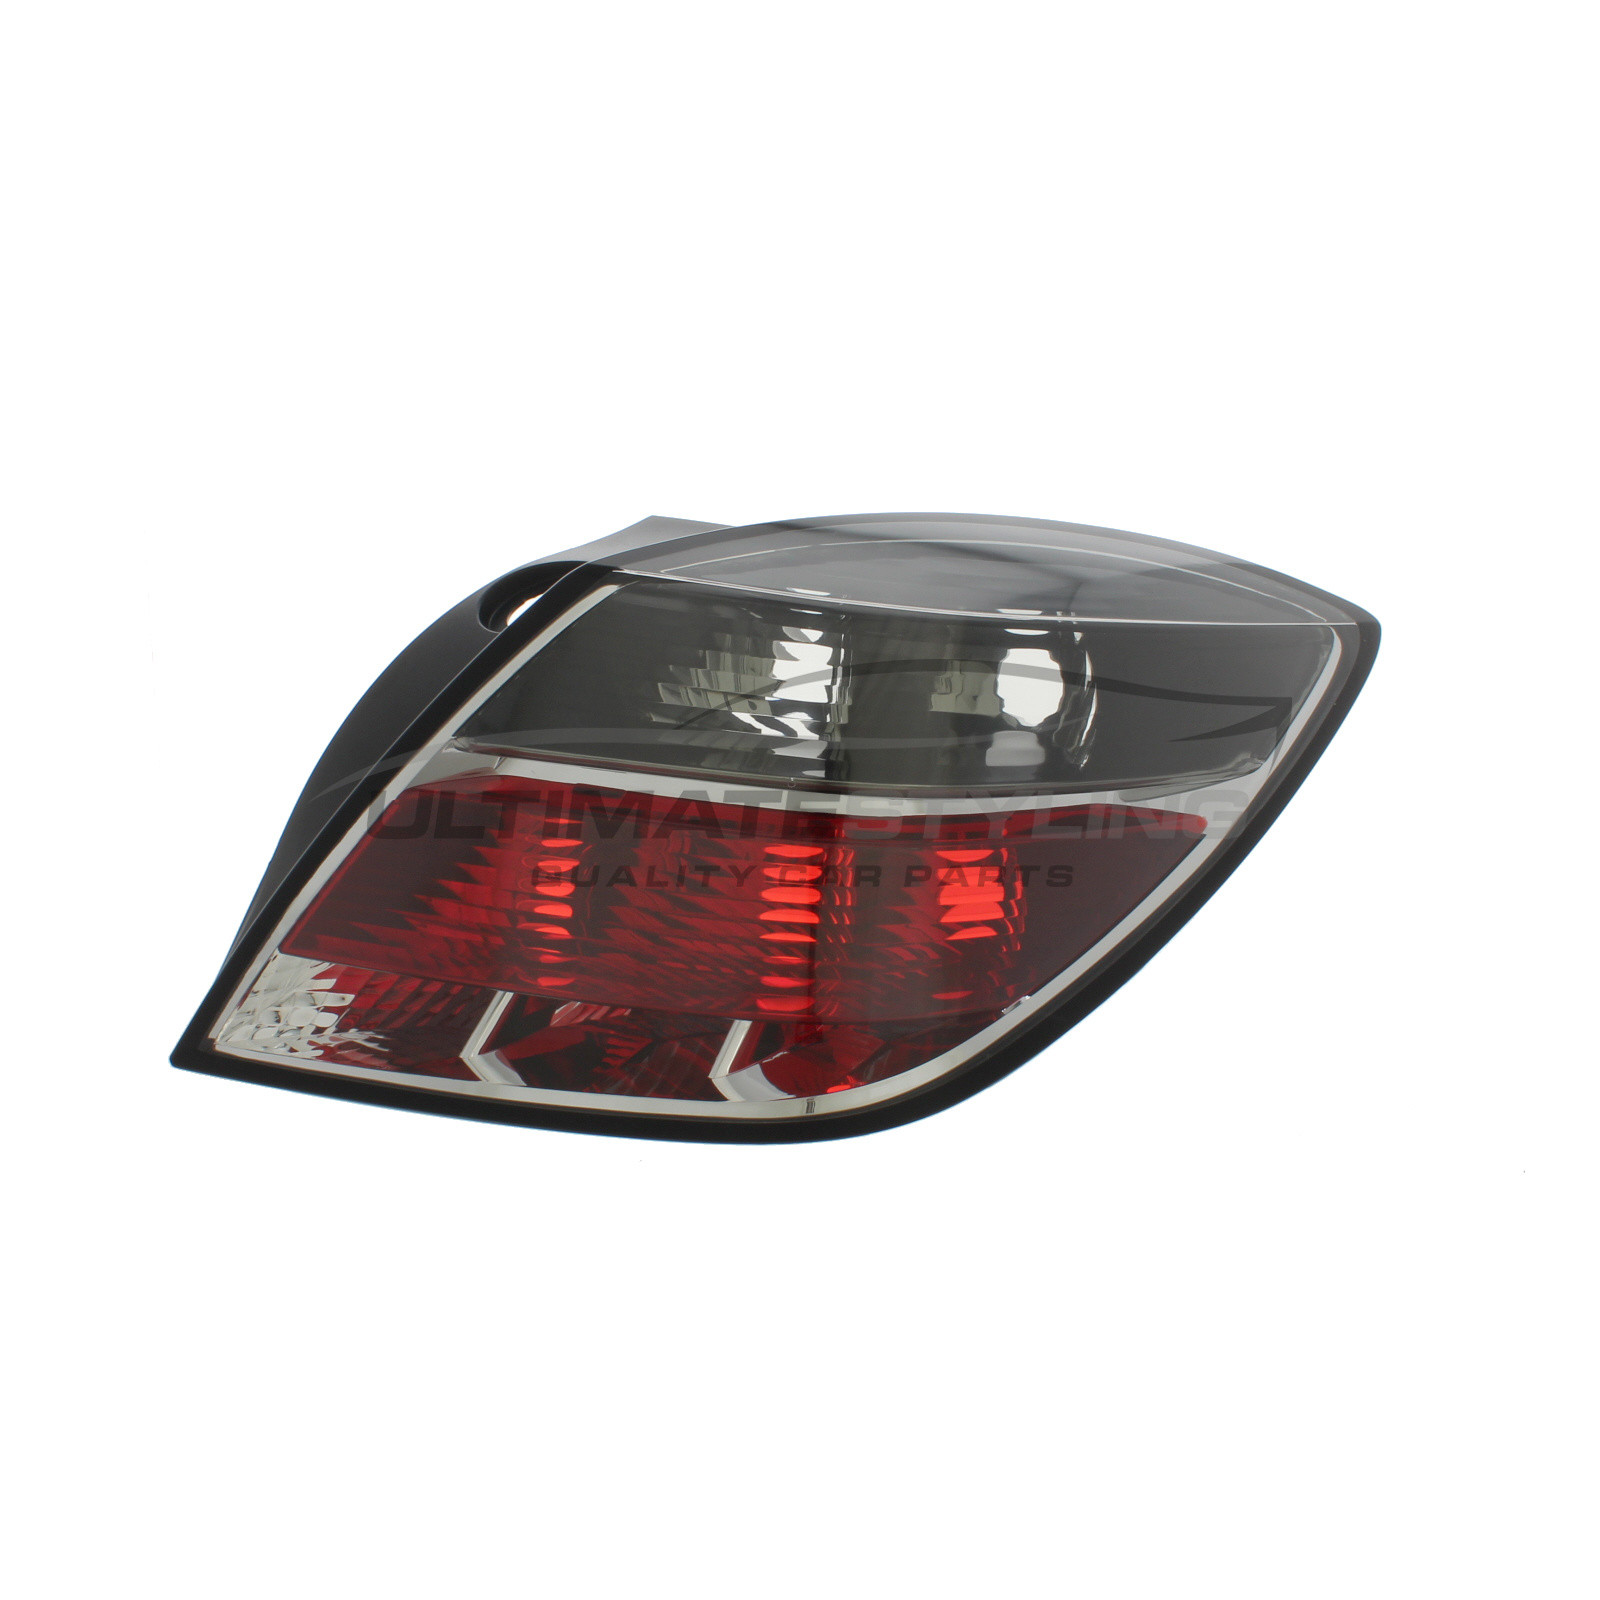 Vauxhall Astra 2004-2011 Non-LED with Smoked Indicator Rear Light / Tail Light Excluding Bulb Holder Drivers Side (RH)